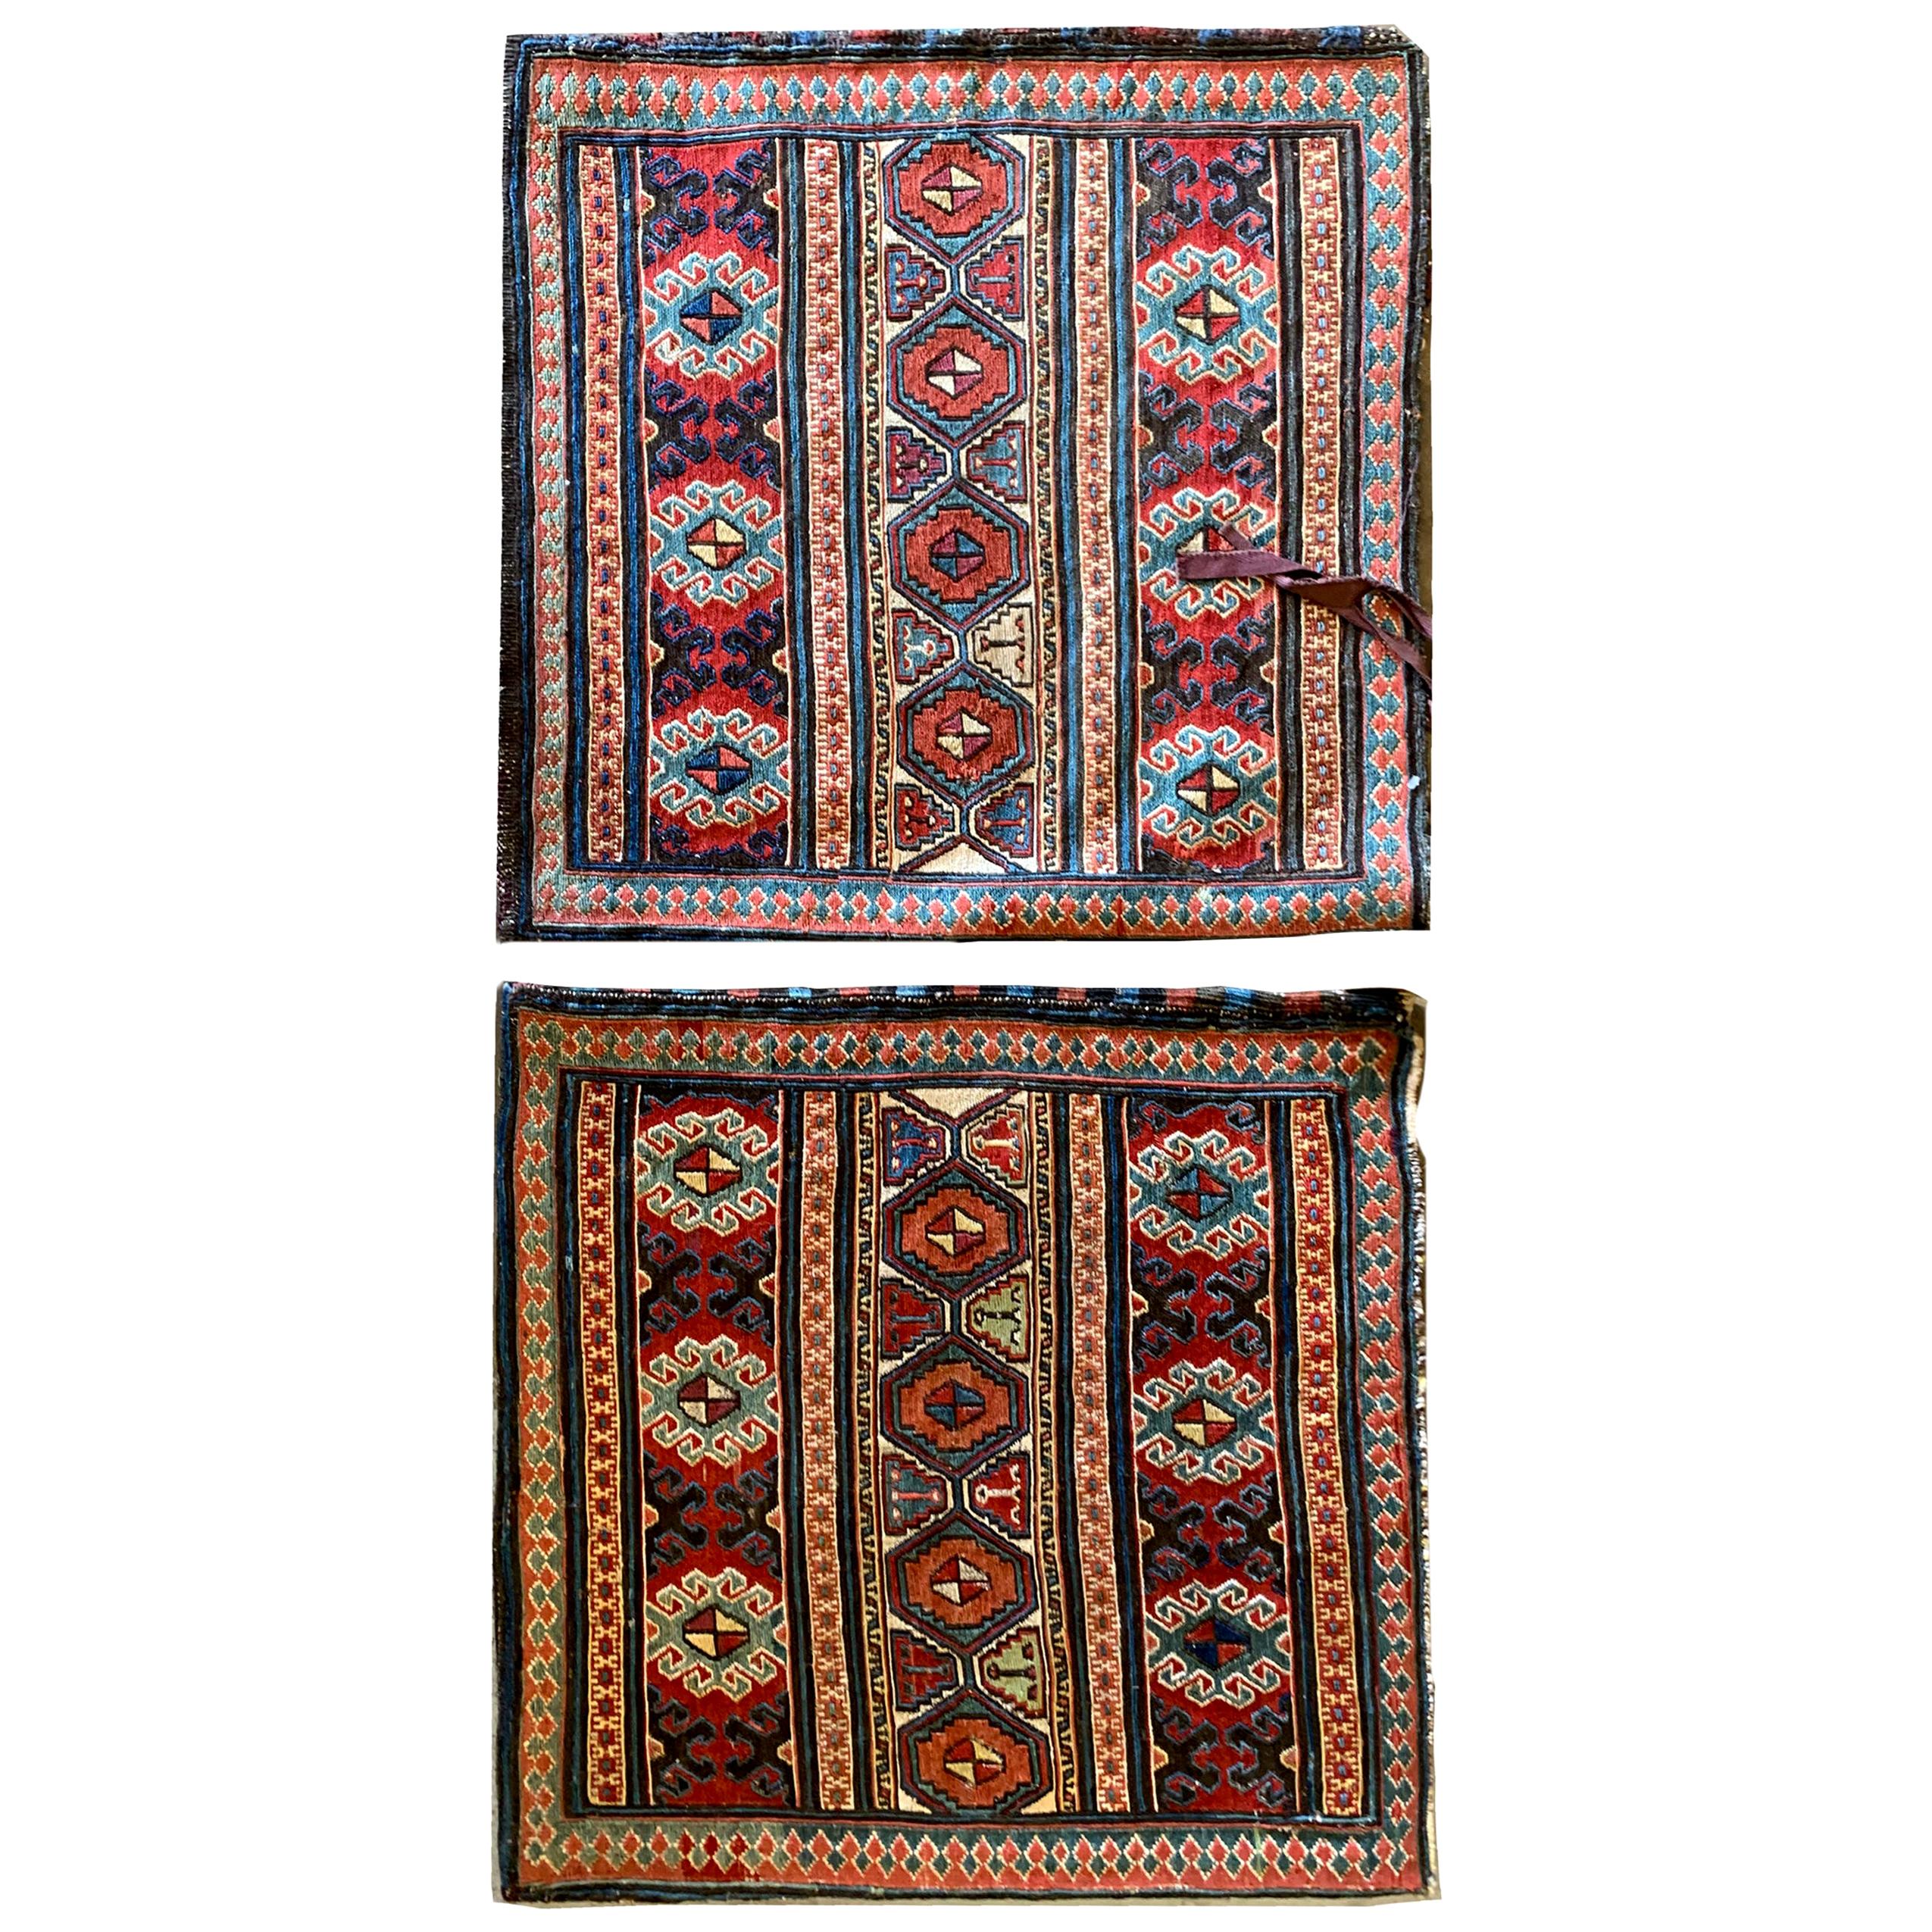 Pair of Collectible Antique Rugs, Kilims Oriental Caucasian Wool "Khorjin" Rug For Sale